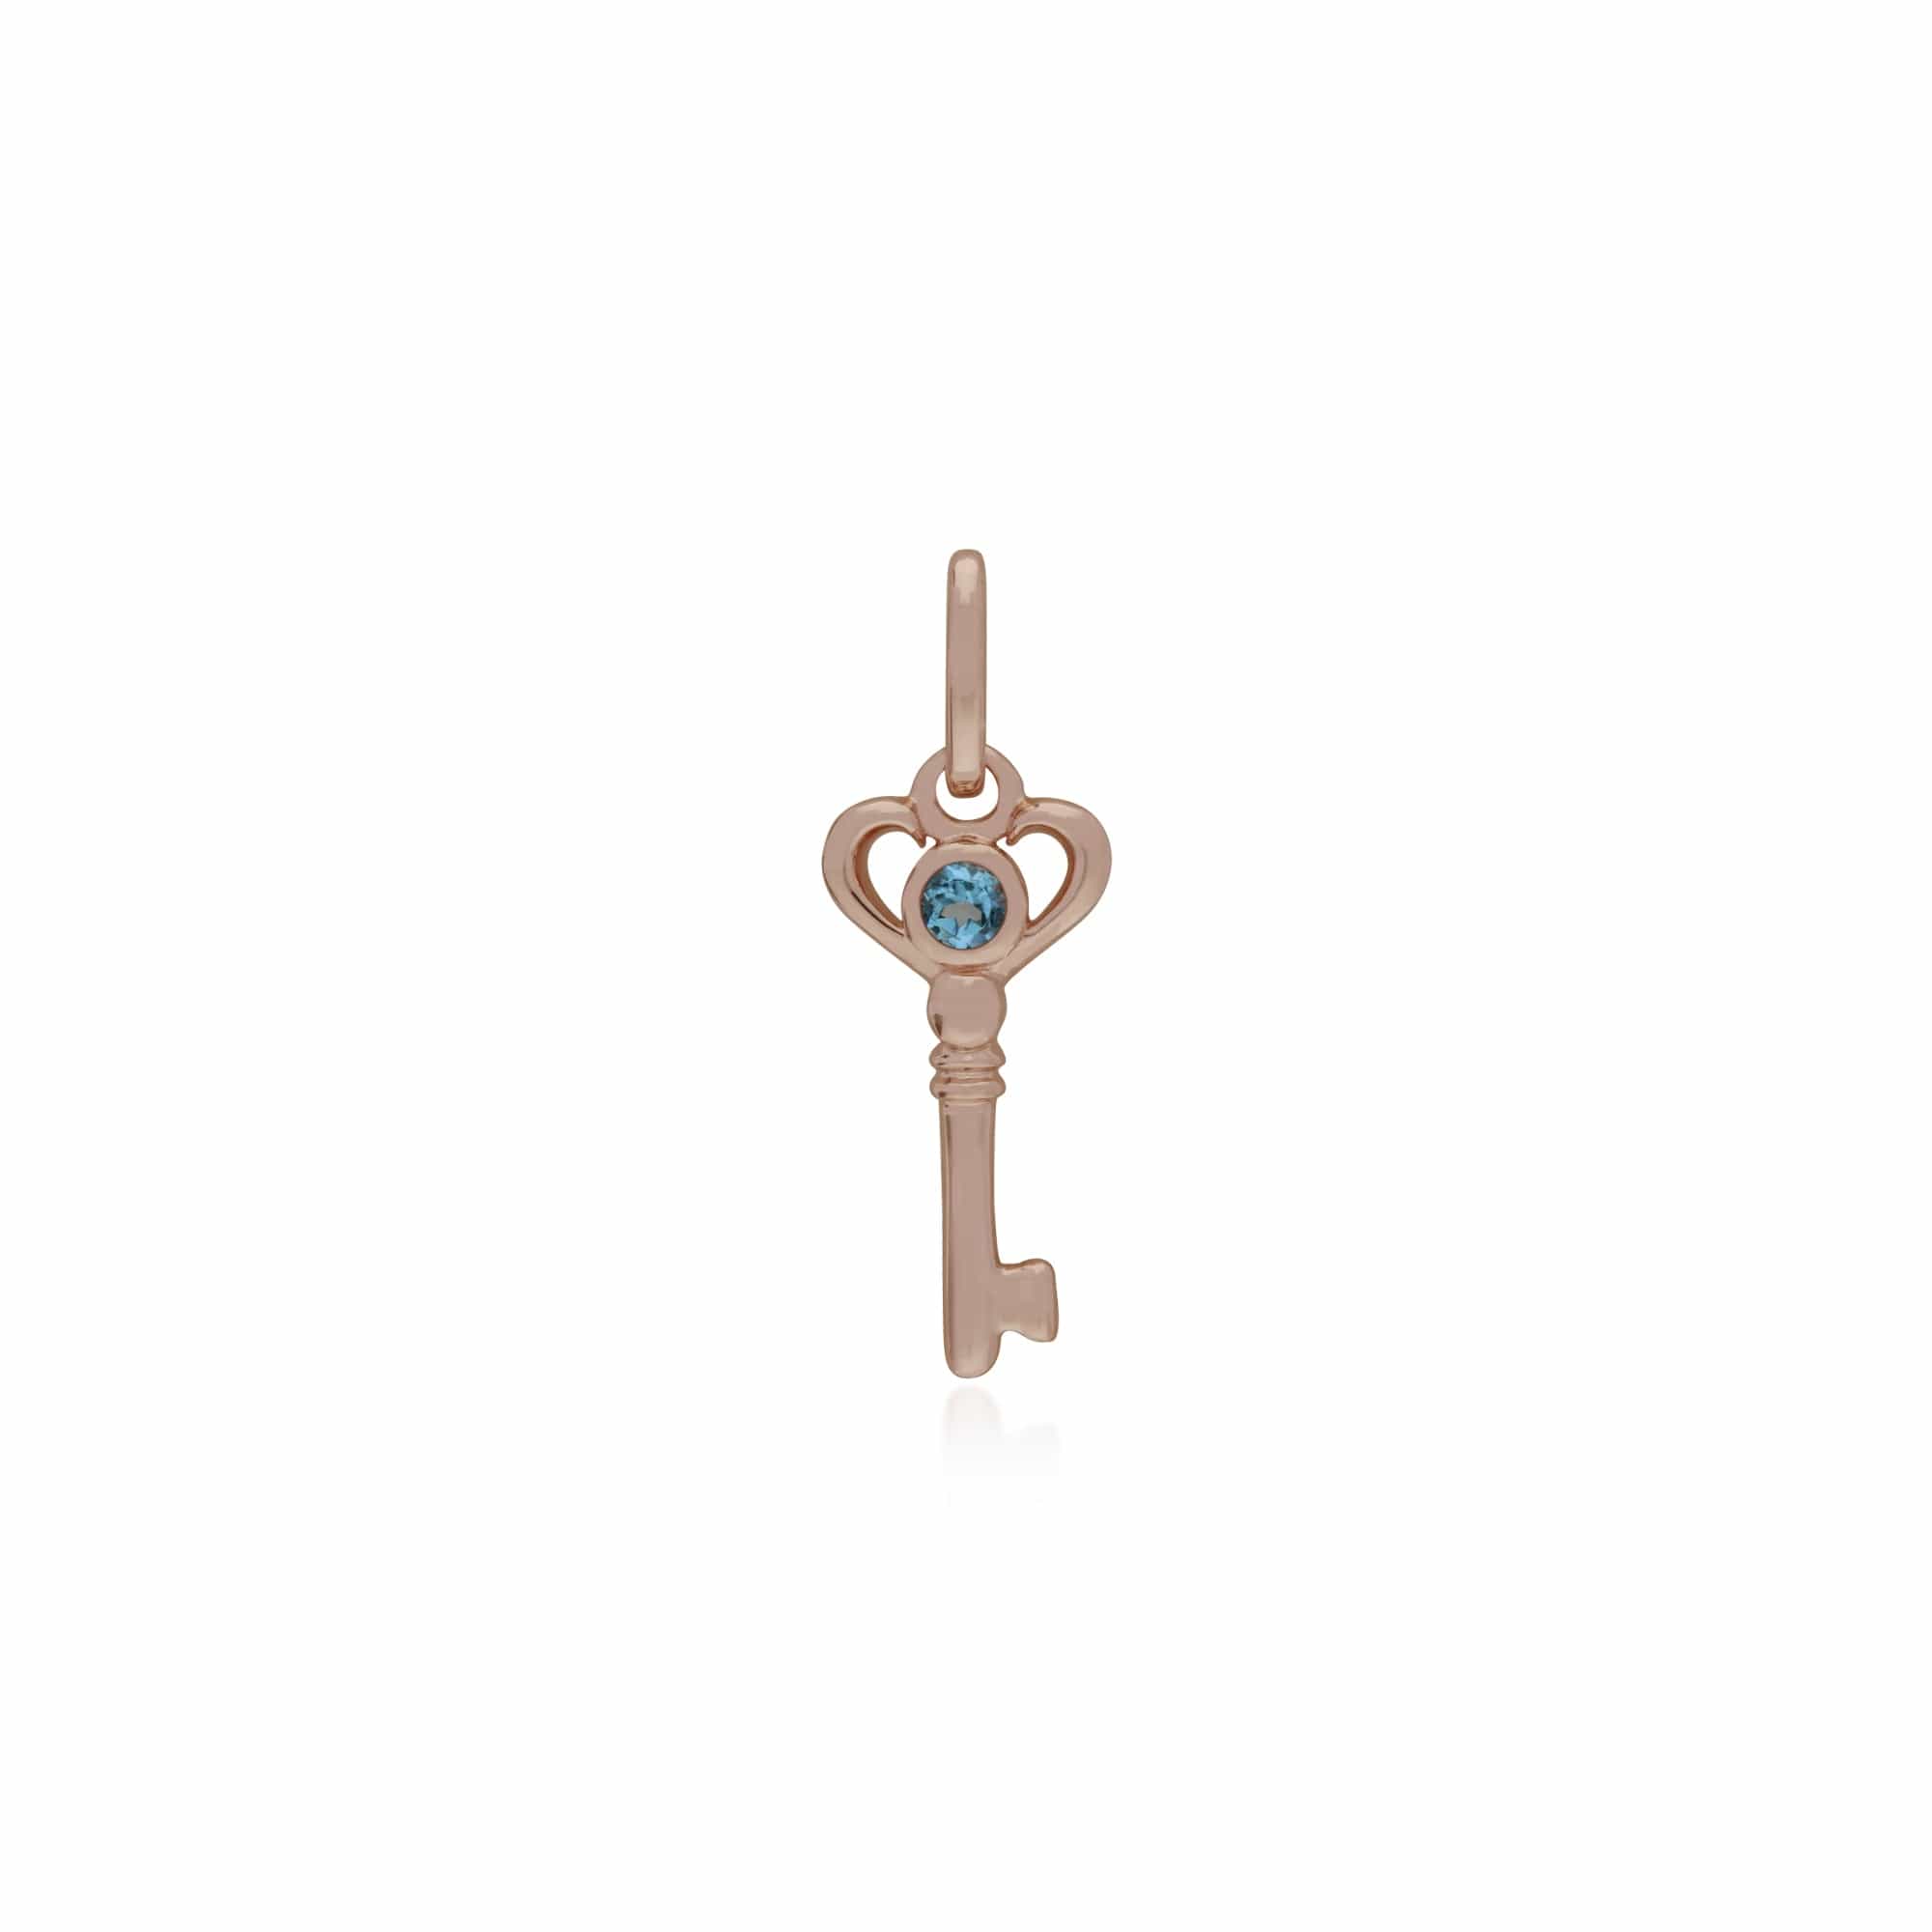 270P026305925-270P026501925 Classic Swirl Heart Lock Pendant & Blue Topaz Key Charm in Rose Gold Plated 925 Sterling Silver 2